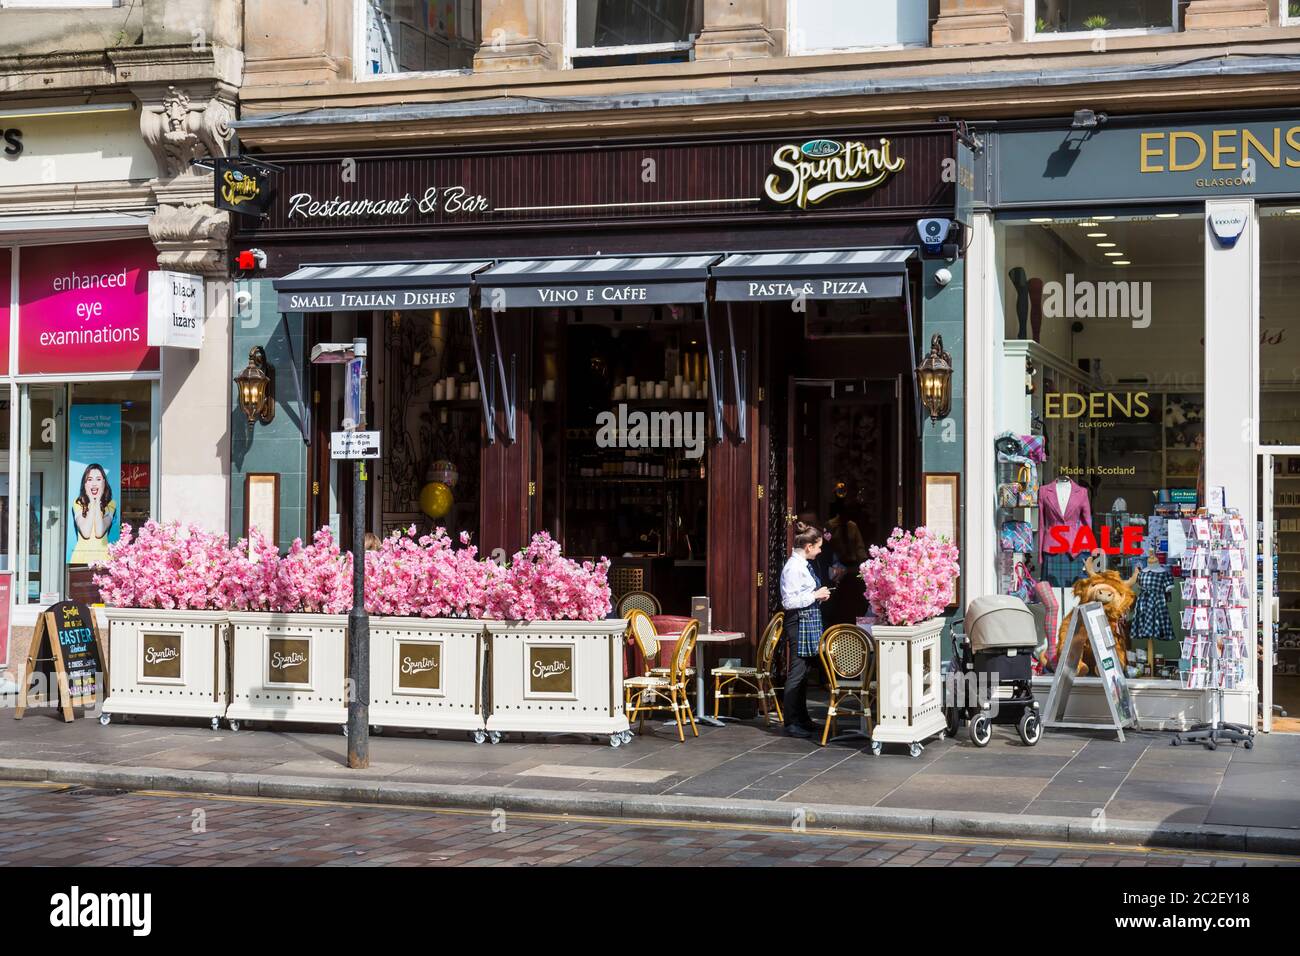 La Vita Spuntini restaurant, bar and café on Gordon Street in Glasgow city centre, Scotland, UK with outdoor seating on the pavement Stock Photo